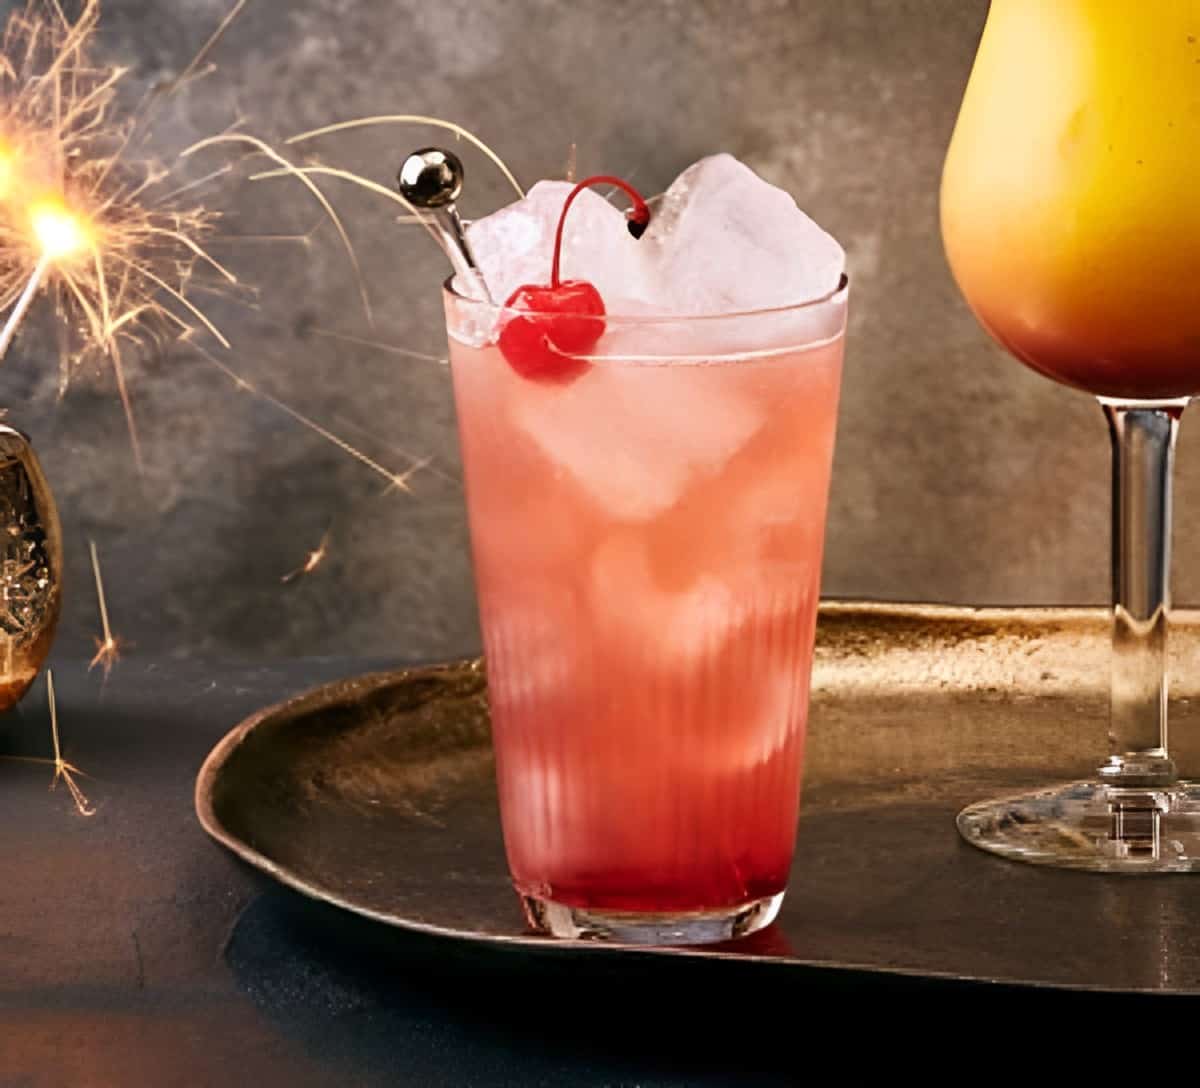 A fresh cocktail in a tall glass garnished with a cherry.